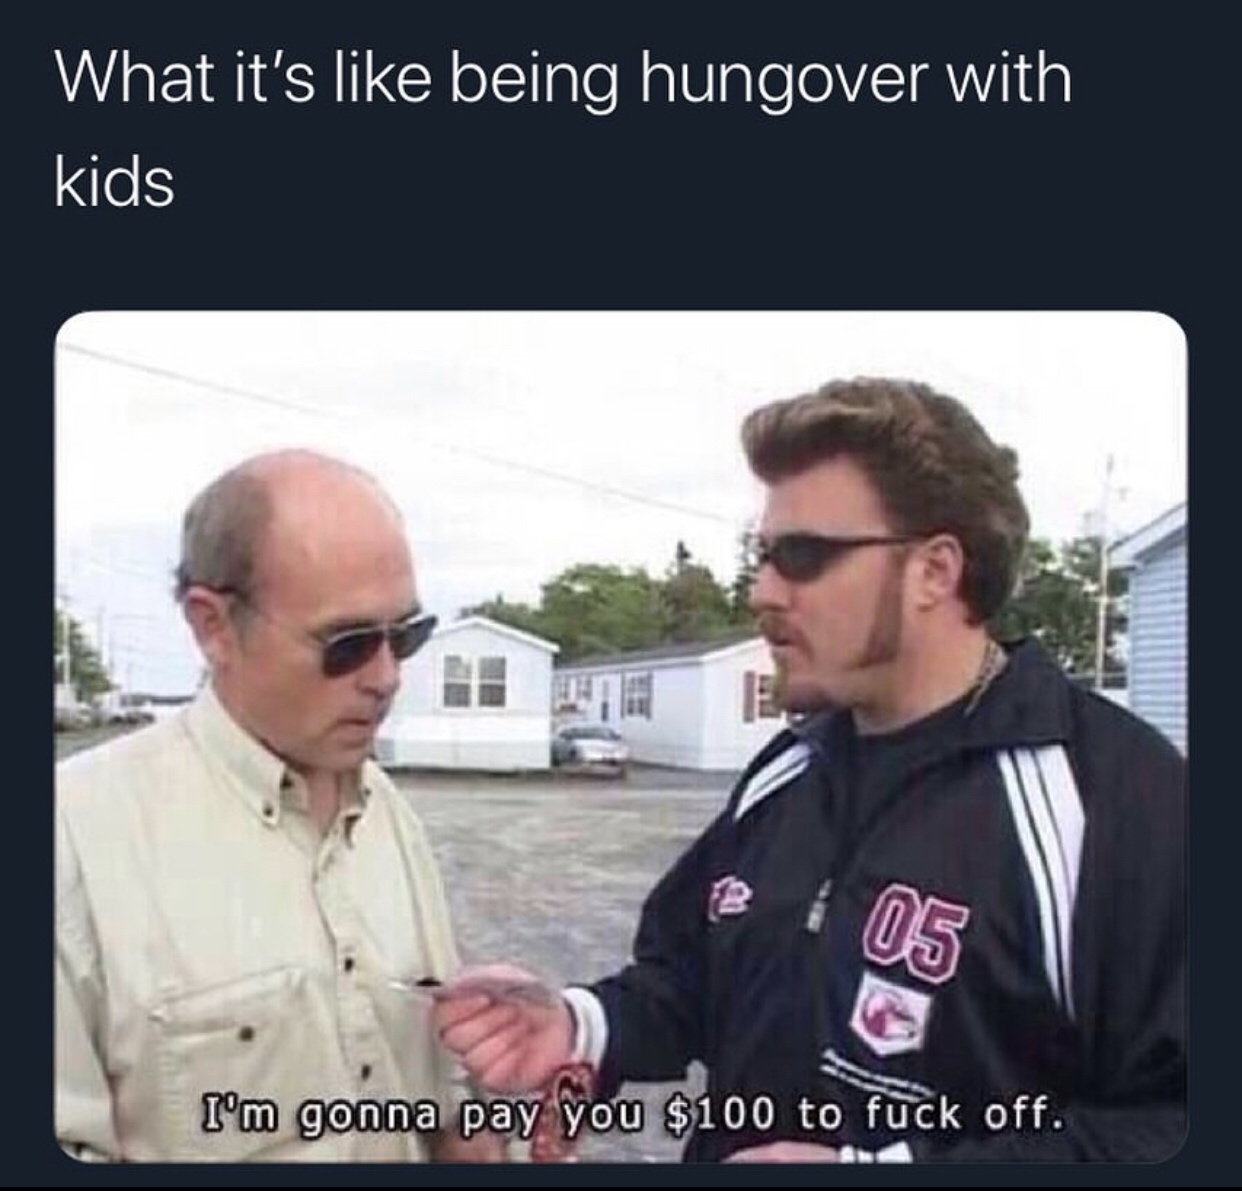 funny memes - i m gonna pay you $100 to fuck off gif - What it's being hungover with kids I'm gonna pay you $100 to fuck off.